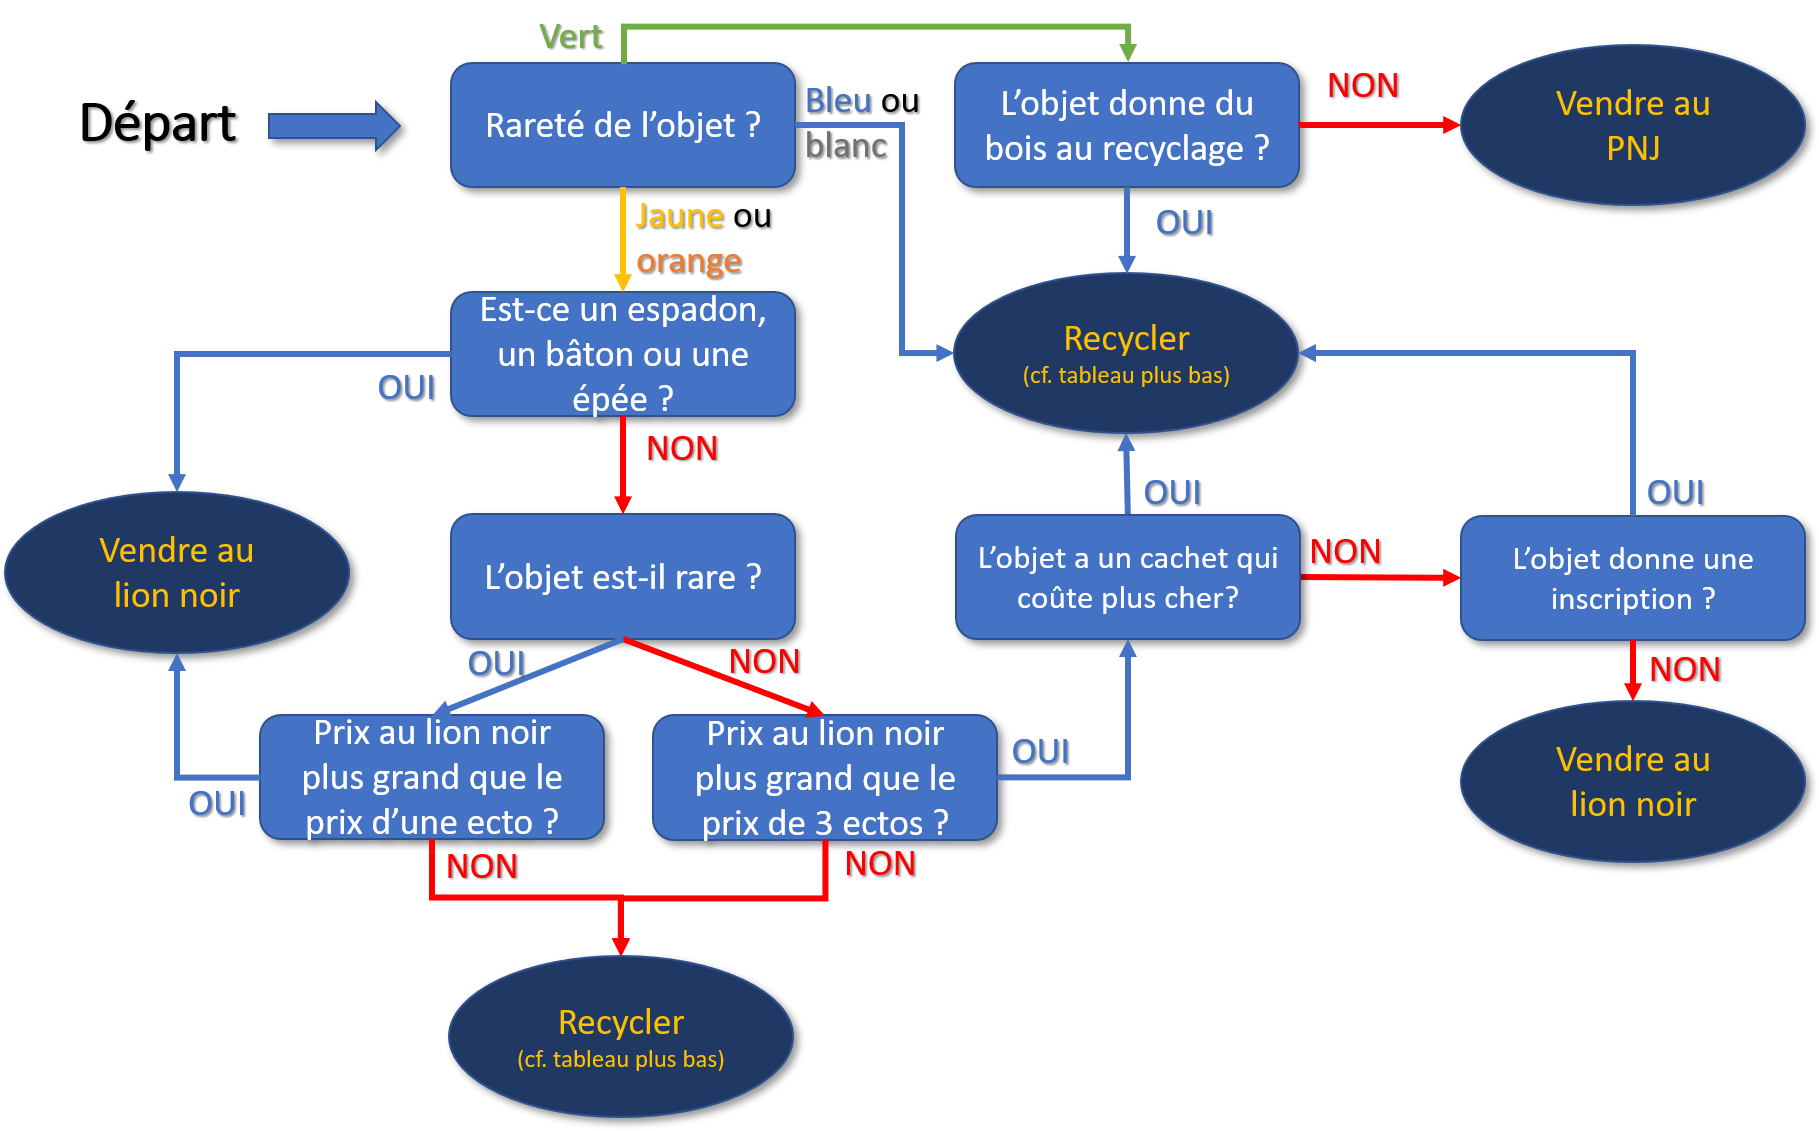 Guide recyclage v3